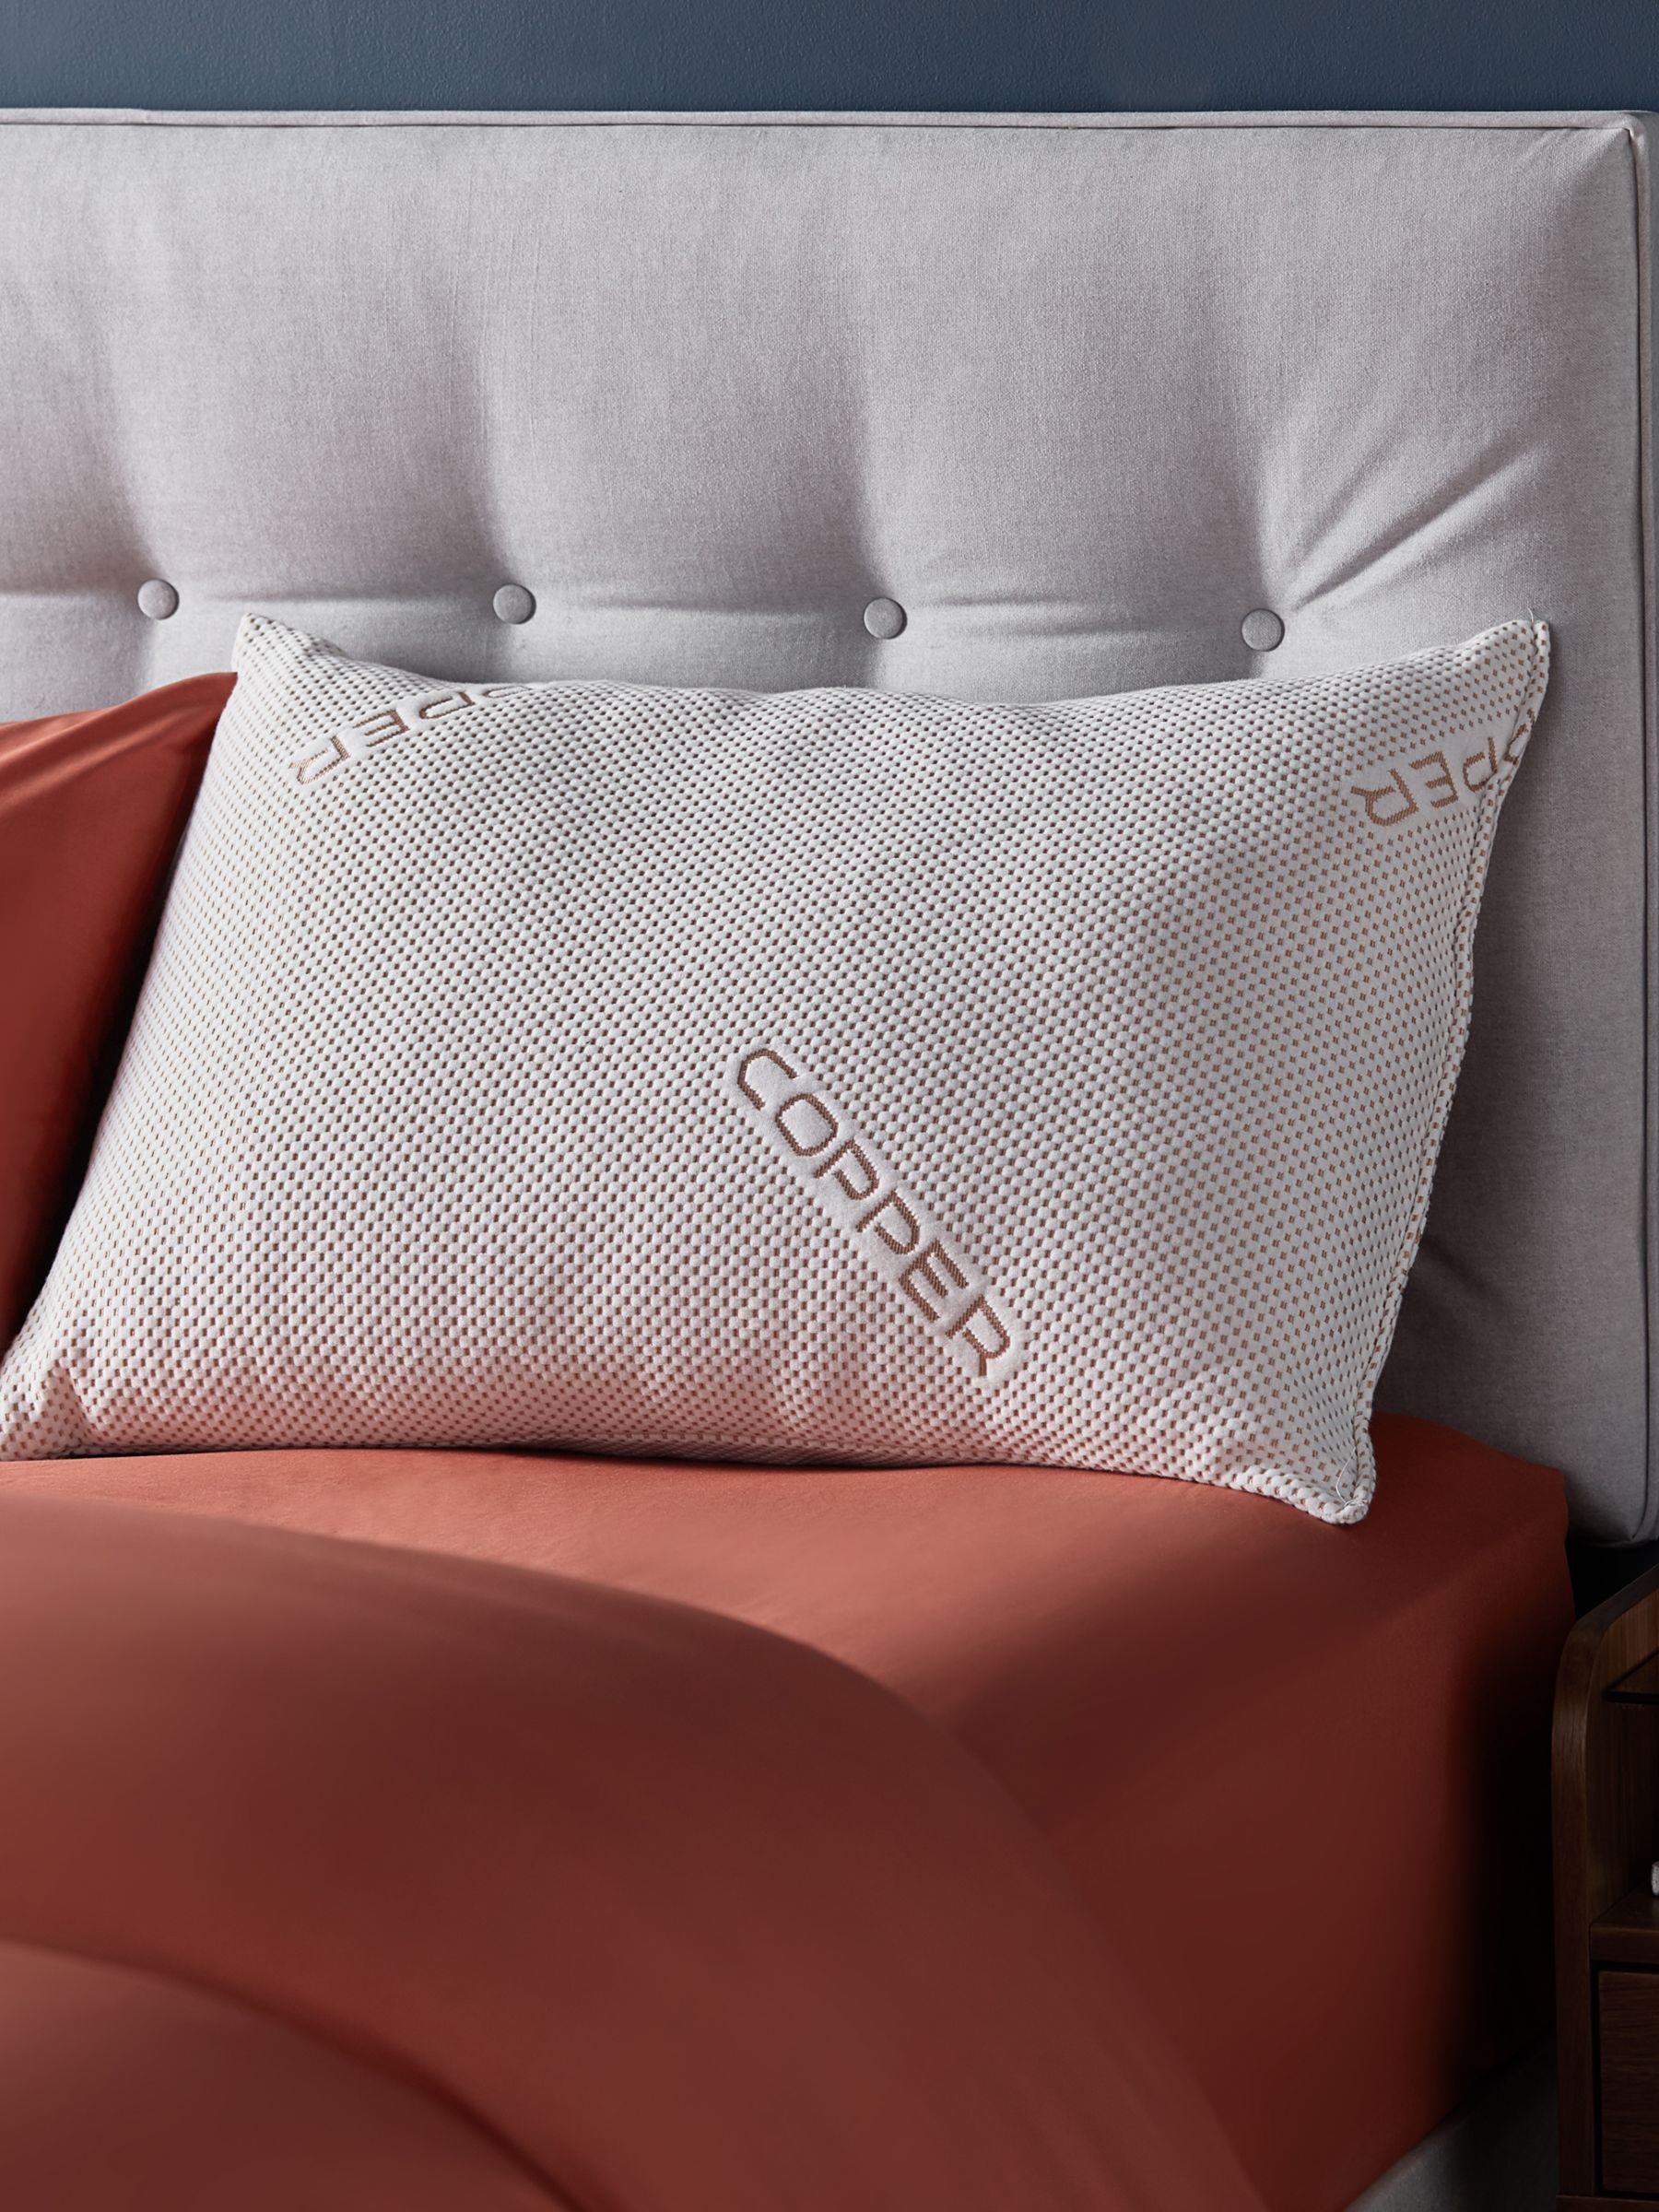 Copper Infused Pillow Firm